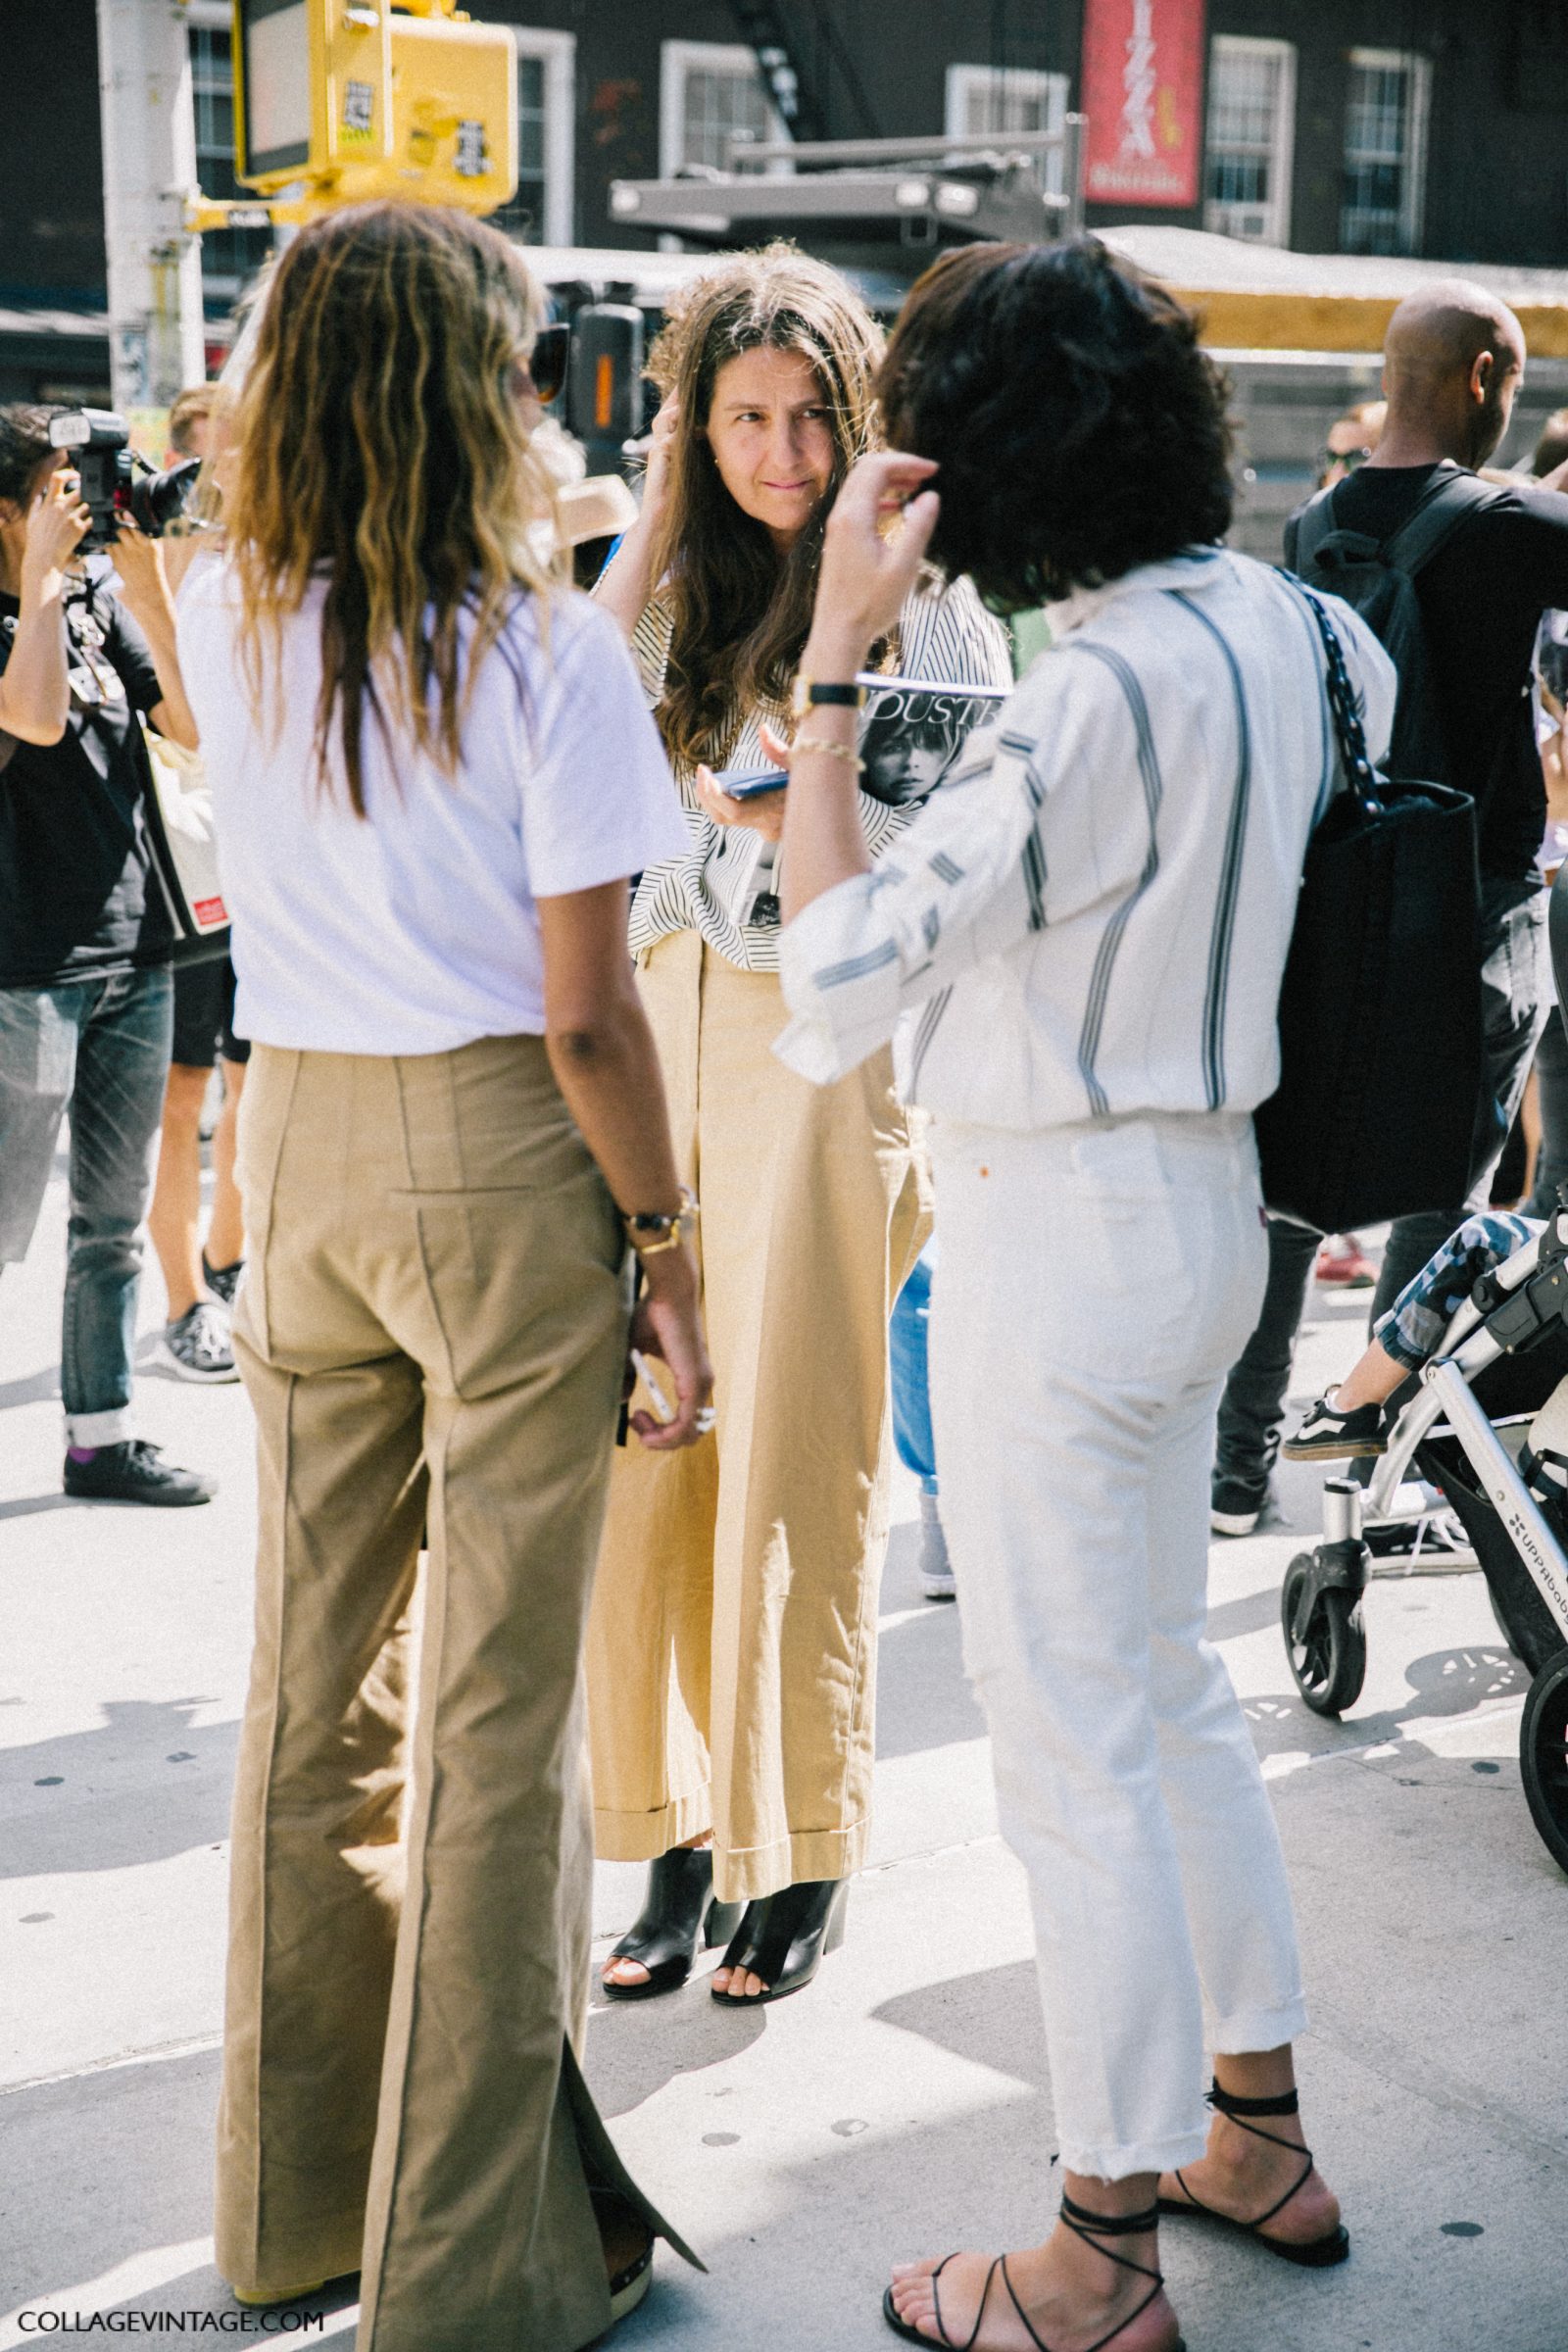 nyfw-new_york_fashion_week_ss17-street_style-outfits-collage_vintage-vintage-phillip_lim-the-row-proenza_schouler-rossie_aussolin-288